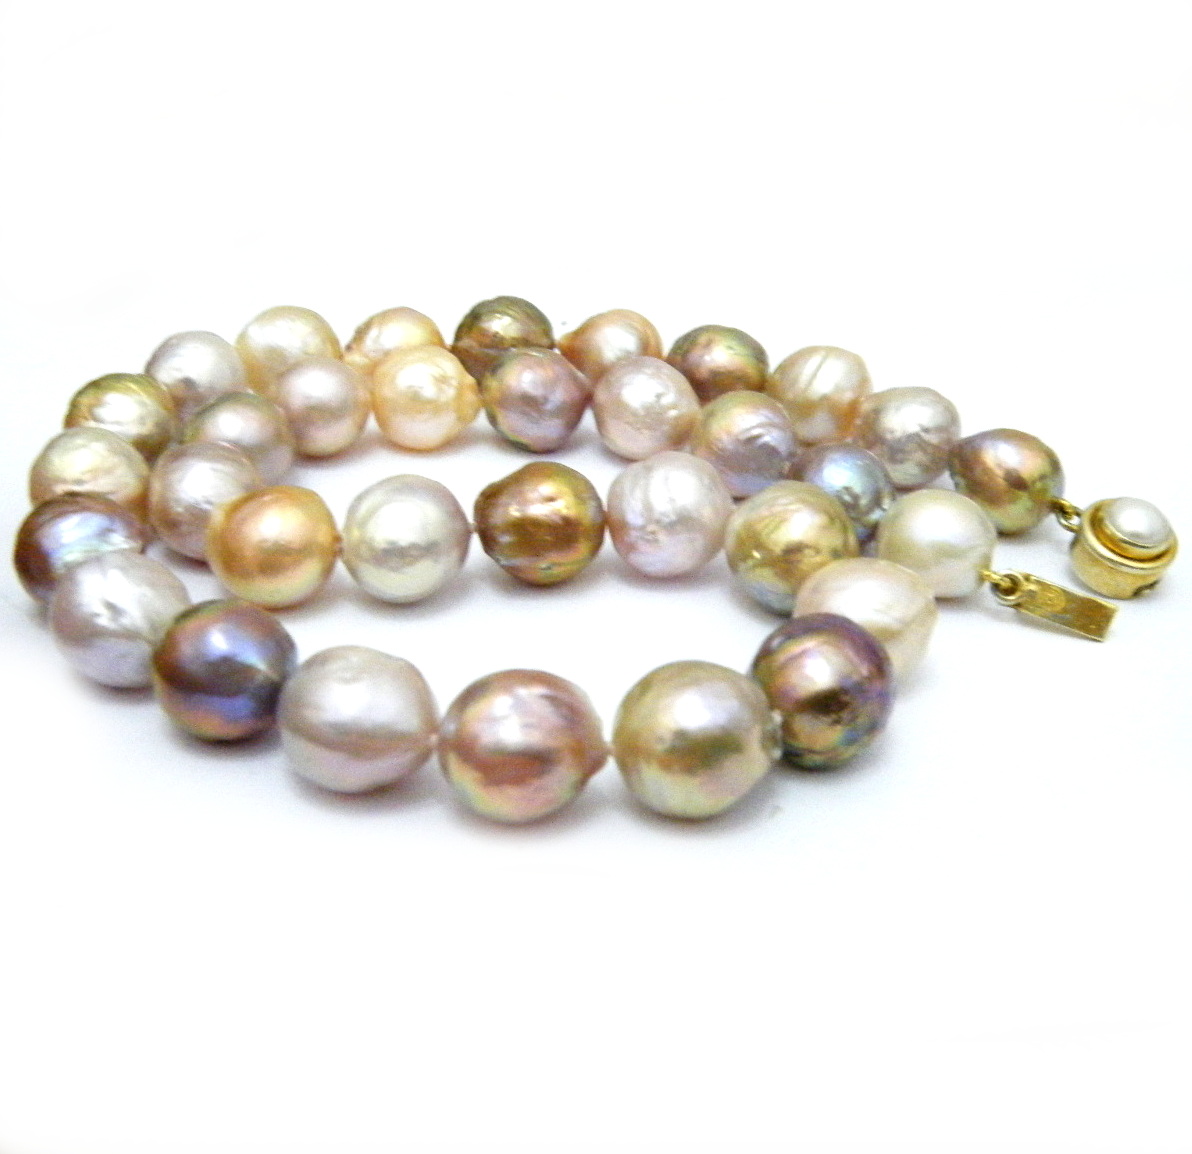 Ripple Pearl Necklaces